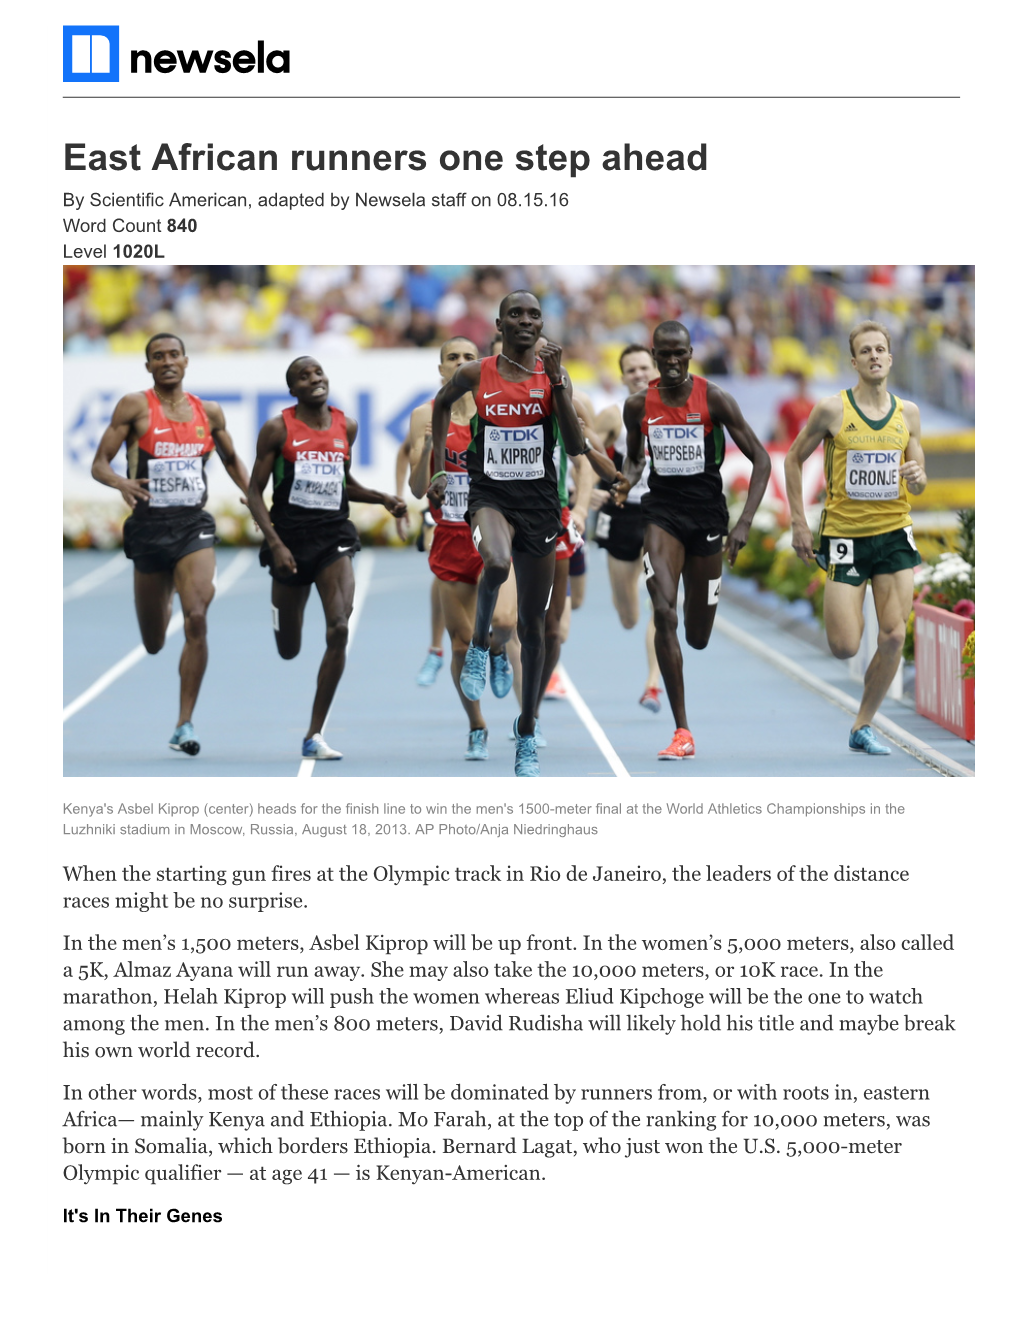 East African Runners One Step Ahead by Scientific American, Adapted by Newsela Staff on 08.15.16 Word Count 840 Level 1020L